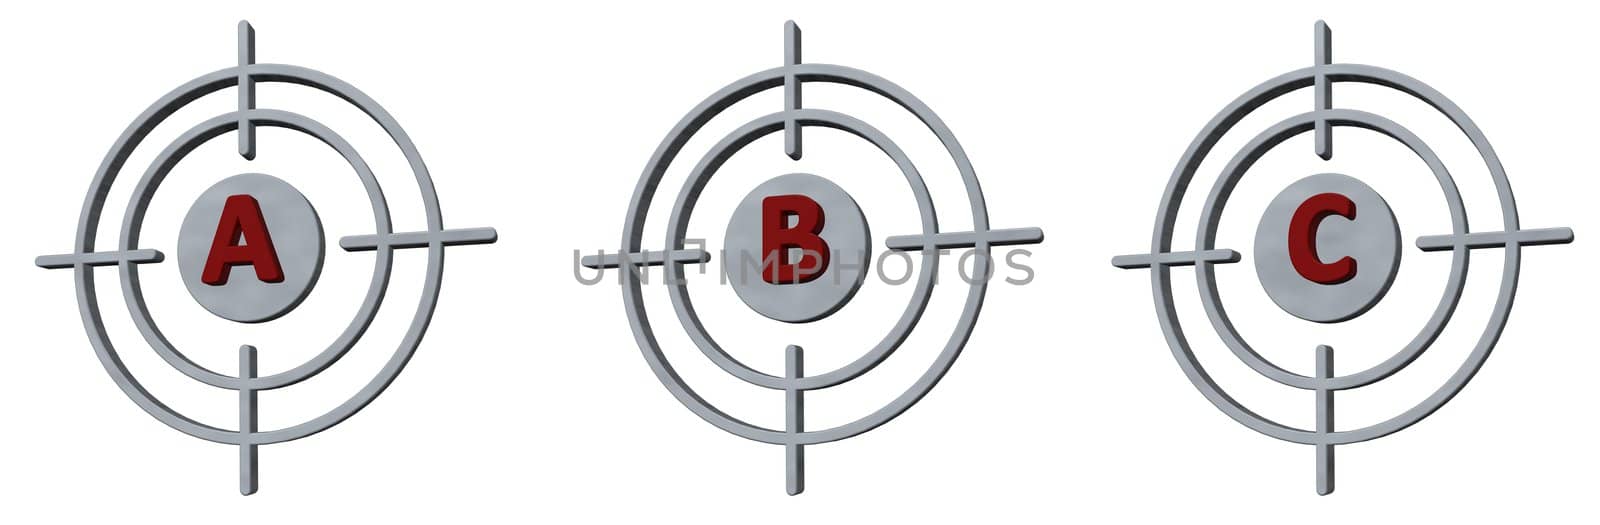 gun sights with the letters abc on white background - 3d illustration